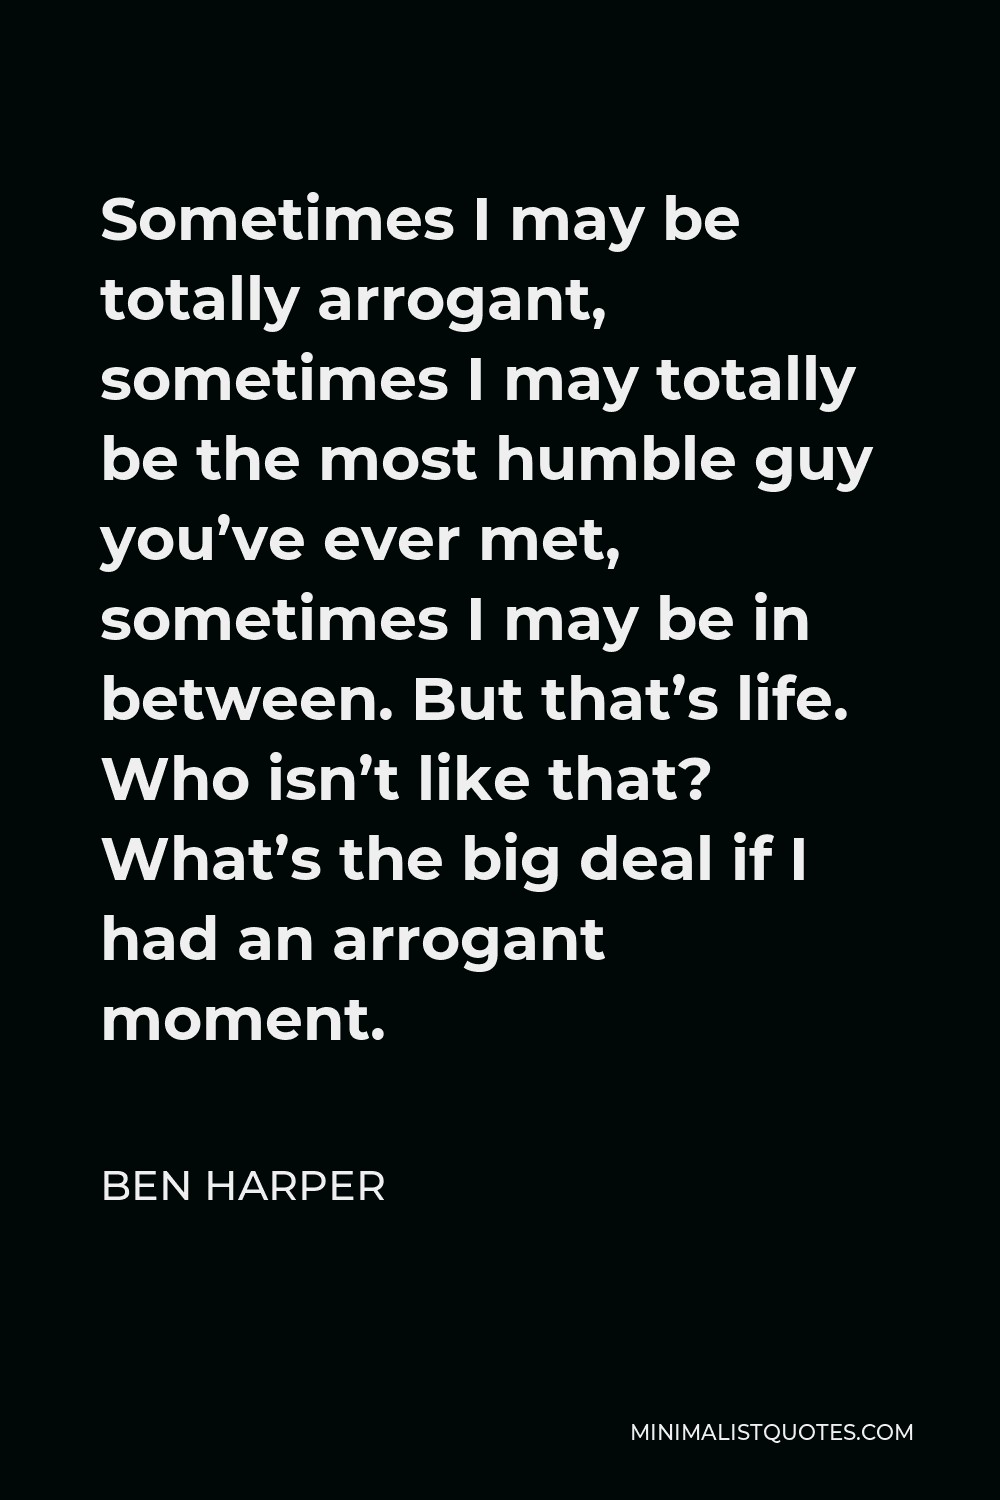 Ben Harper Quote - Sometimes I may be totally arrogant, sometimes I may totally be the most humble guy you’ve ever met, sometimes I may be in between. But that’s life. Who isn’t like that? What’s the big deal if I had an arrogant moment.